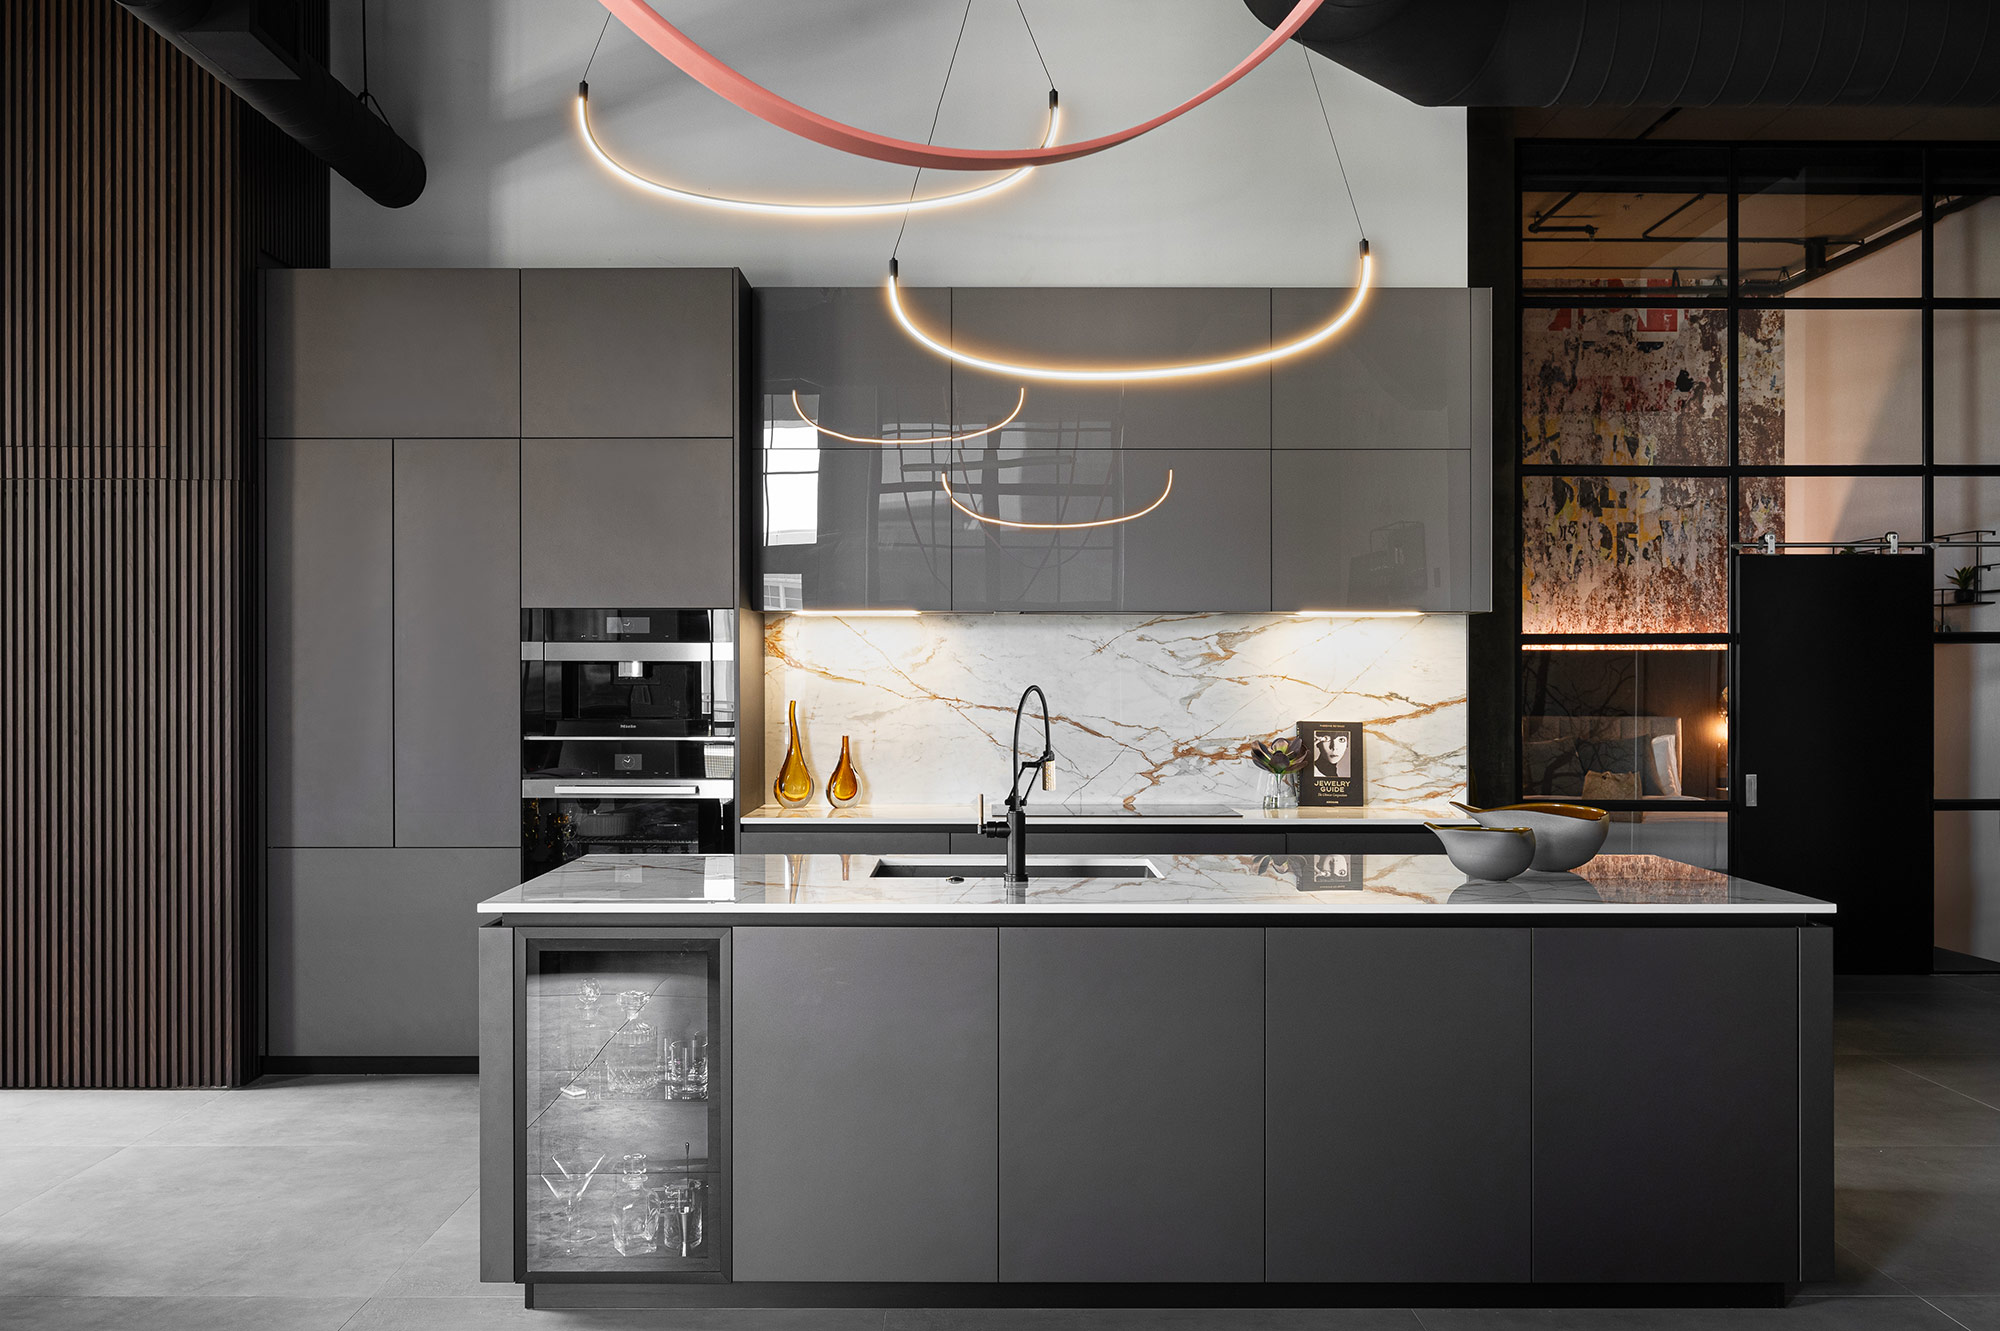 Image of Alessandra Saggese 2 in The elegance and character of Dekton Kelya for a kitchen - Cosentino